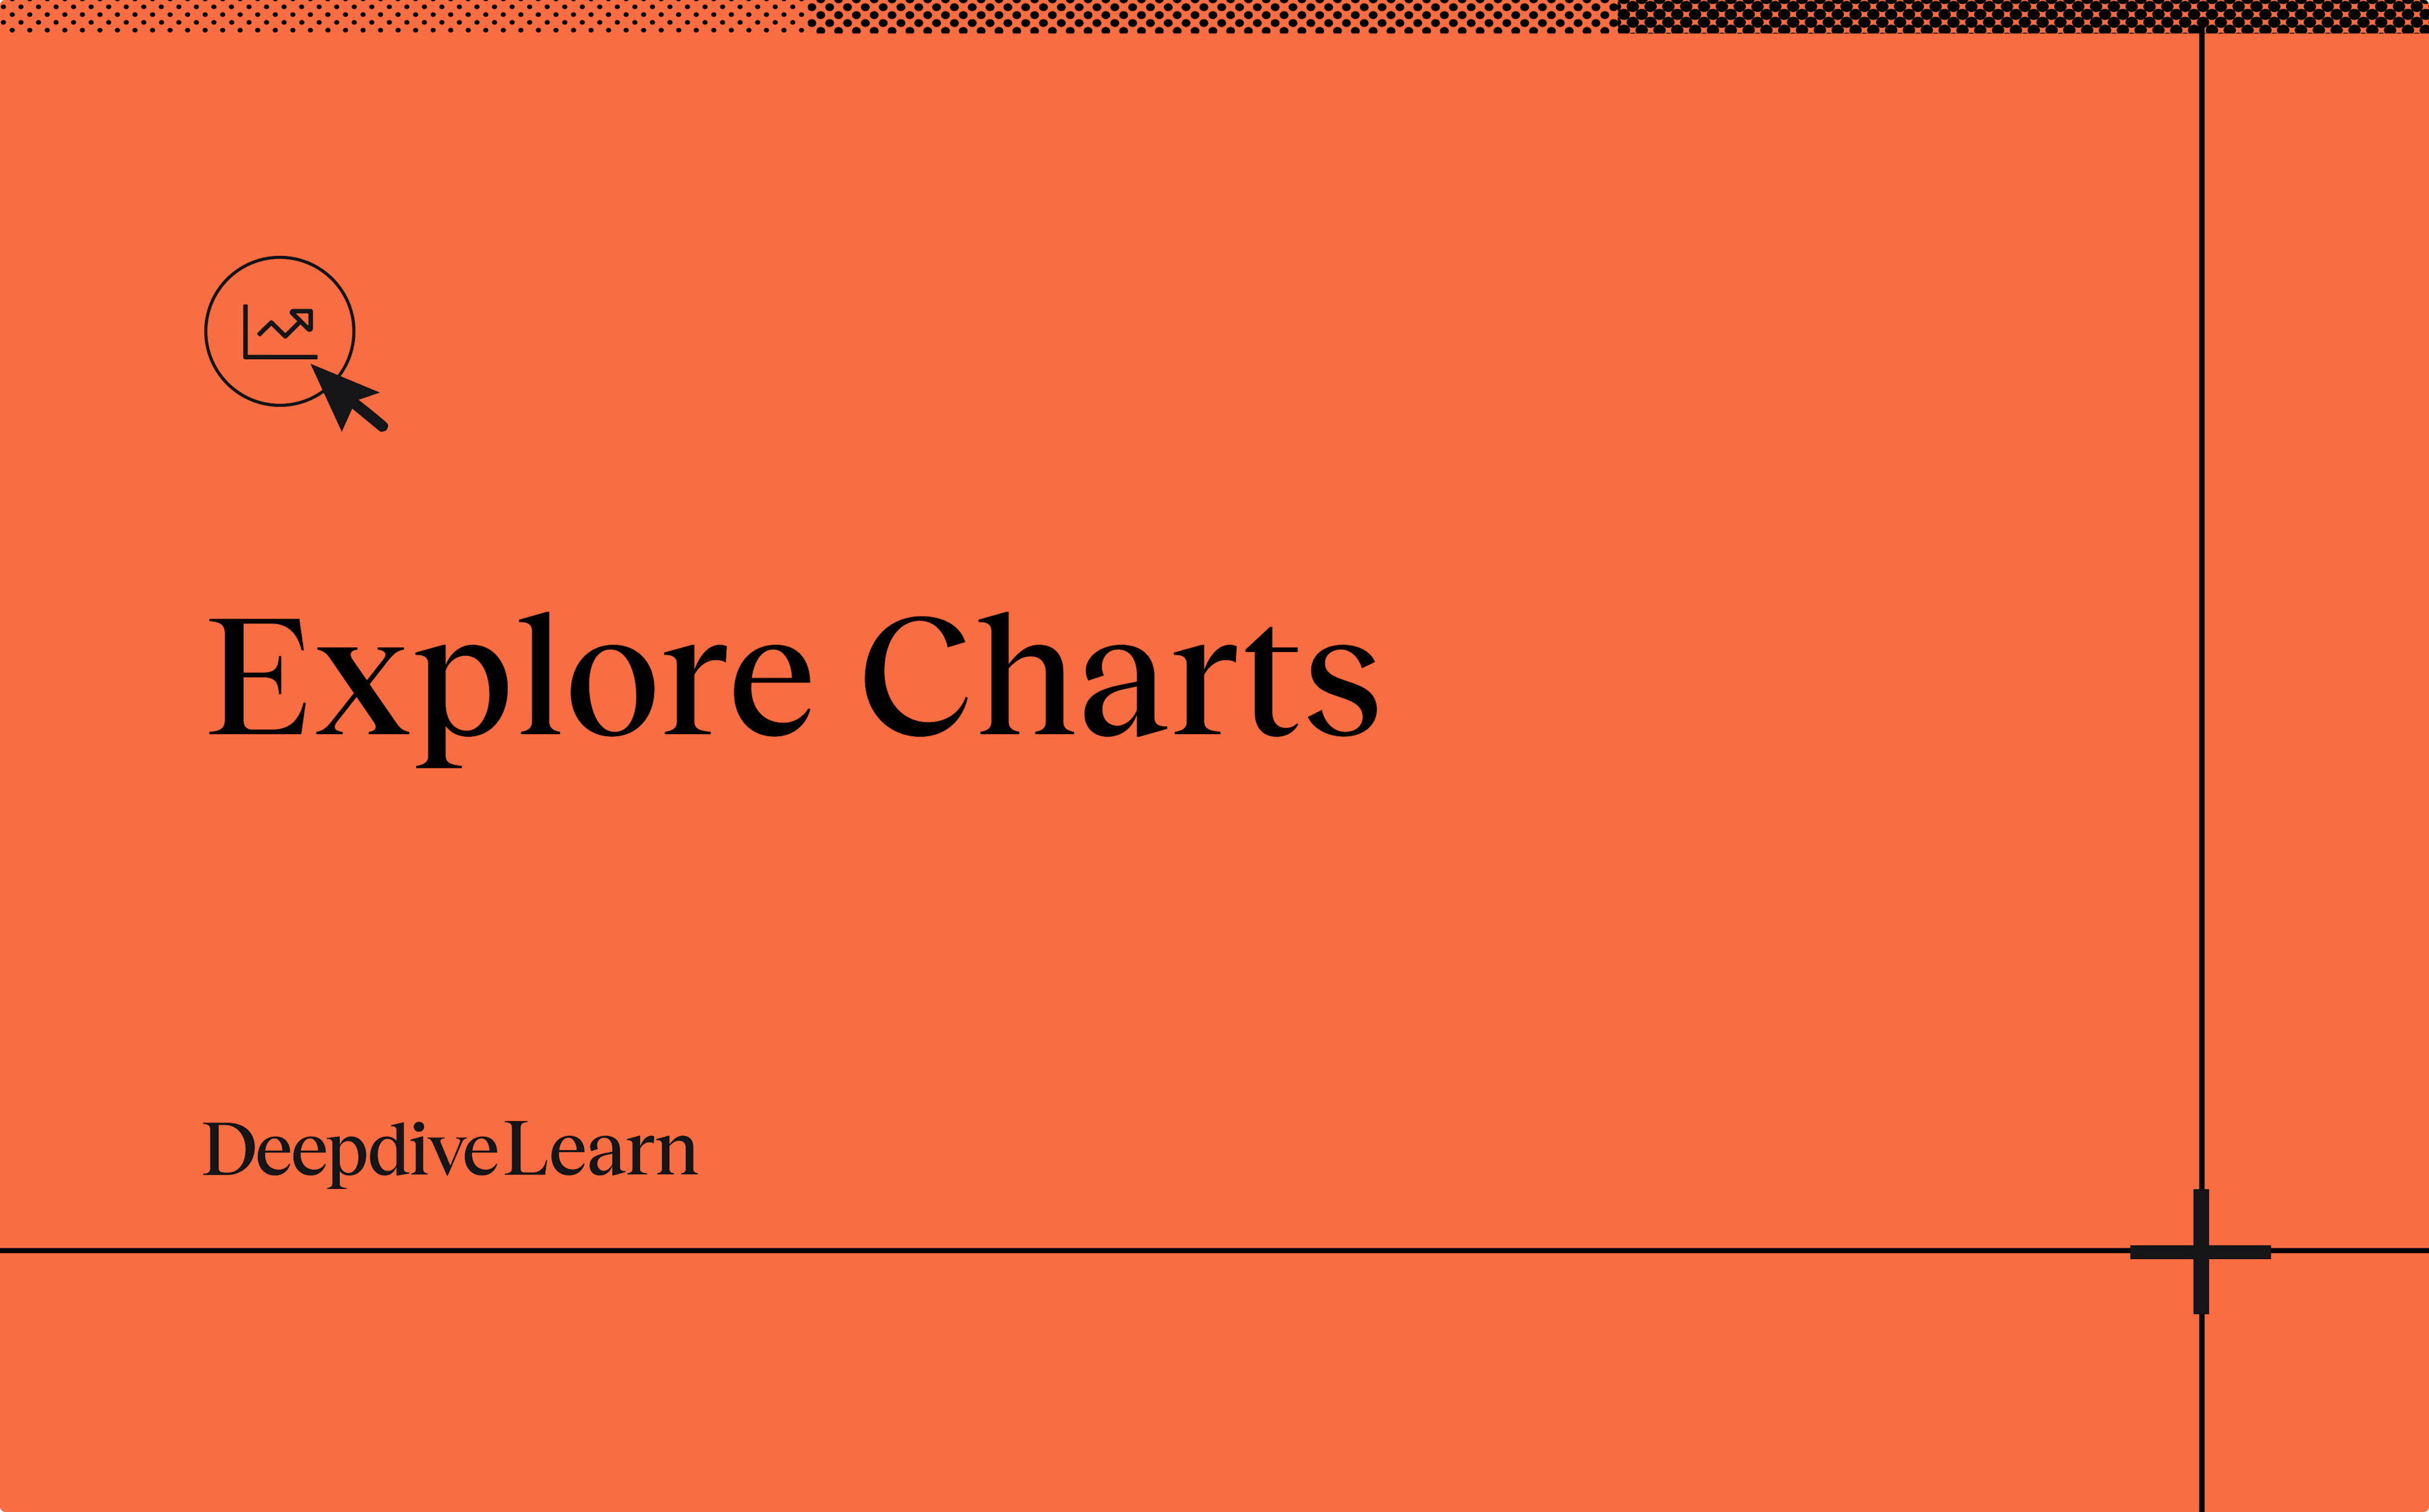 Explore charts by Deepdive Learn